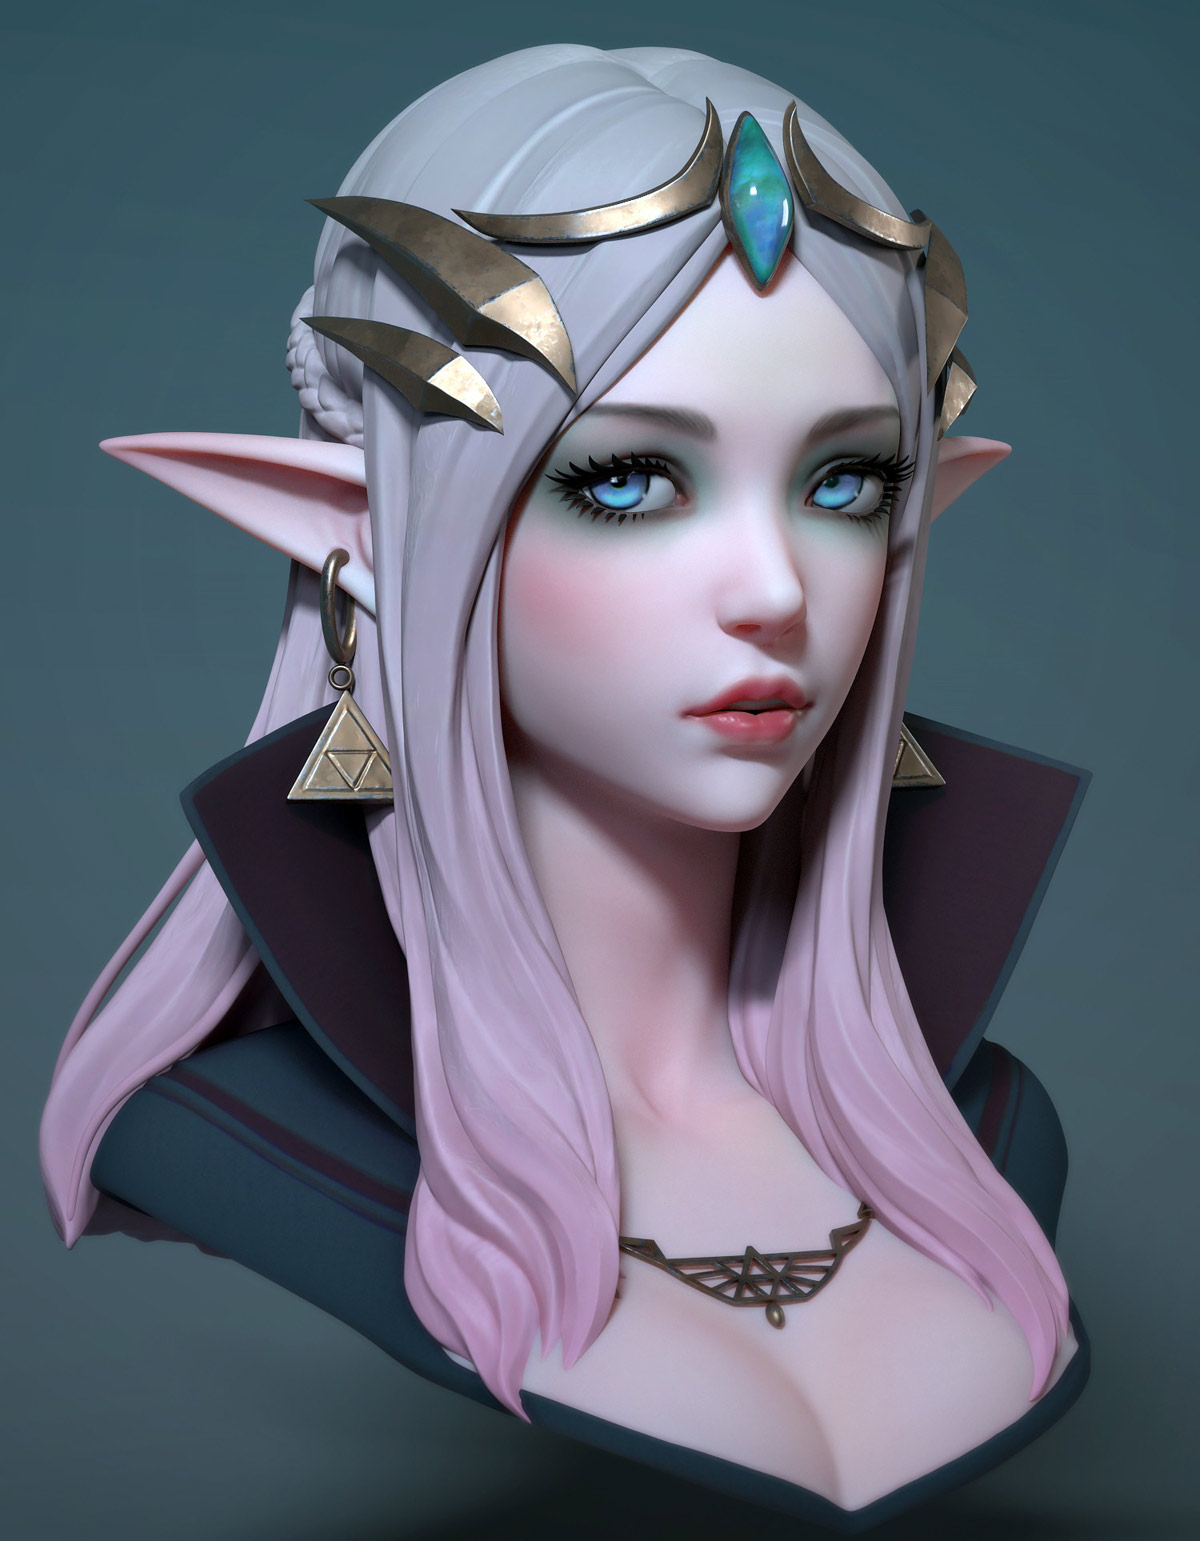 3d model character princess by michael mao